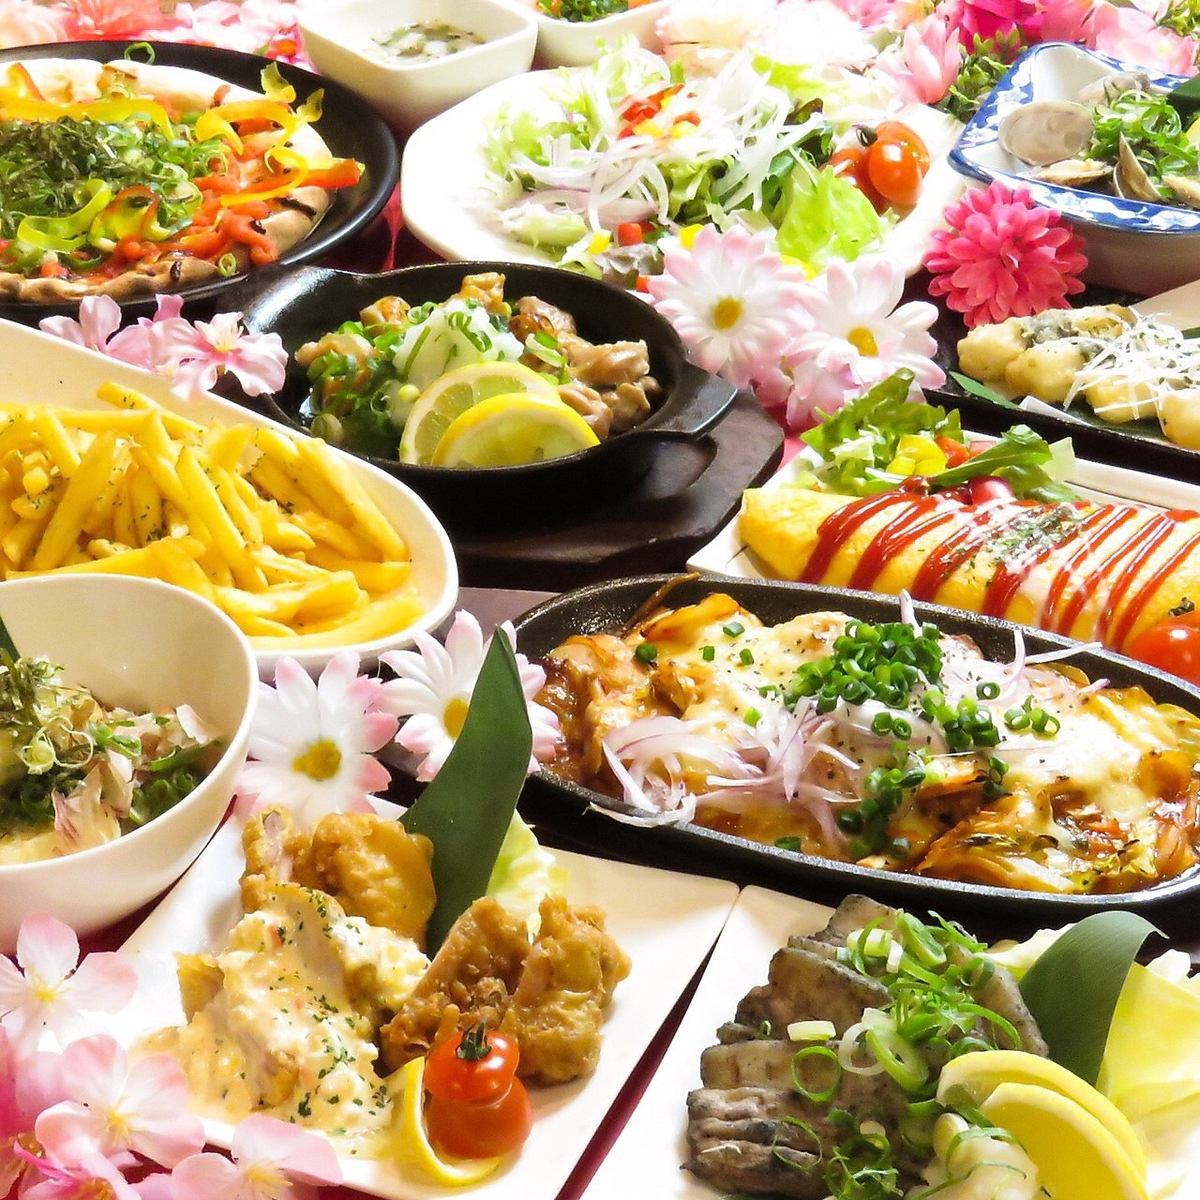 A wide variety of izakaya cuisine ♪ All-you-can-eat and drink for 2 hours starts at 2,700 yen